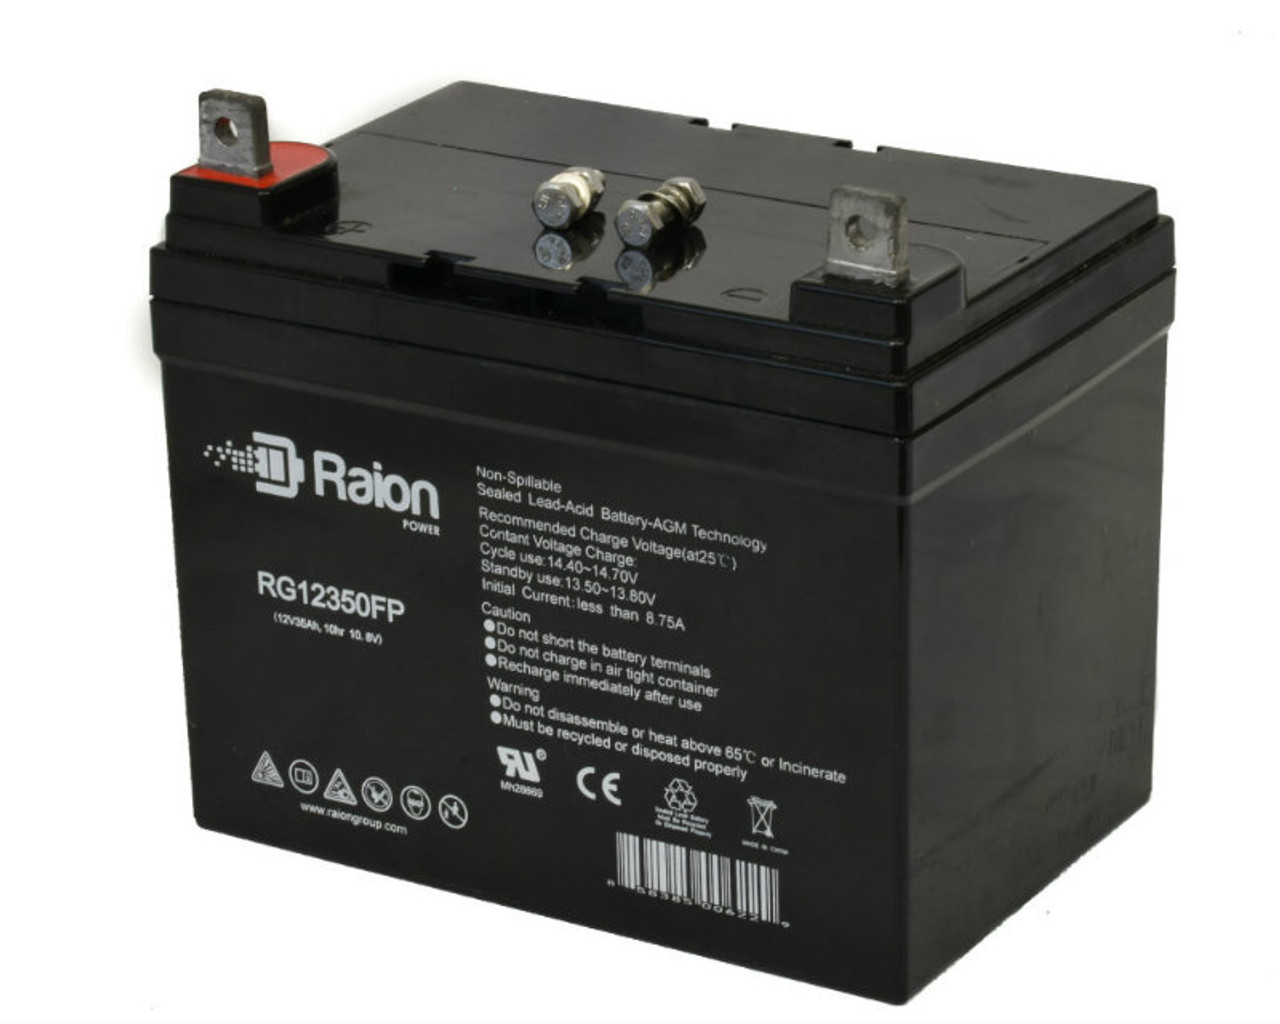 Raion Power Replacement 12V 35Ah RG12350FP Mobility Scooter Battery for Merits Health Products P310 (Travel Ease Regal)